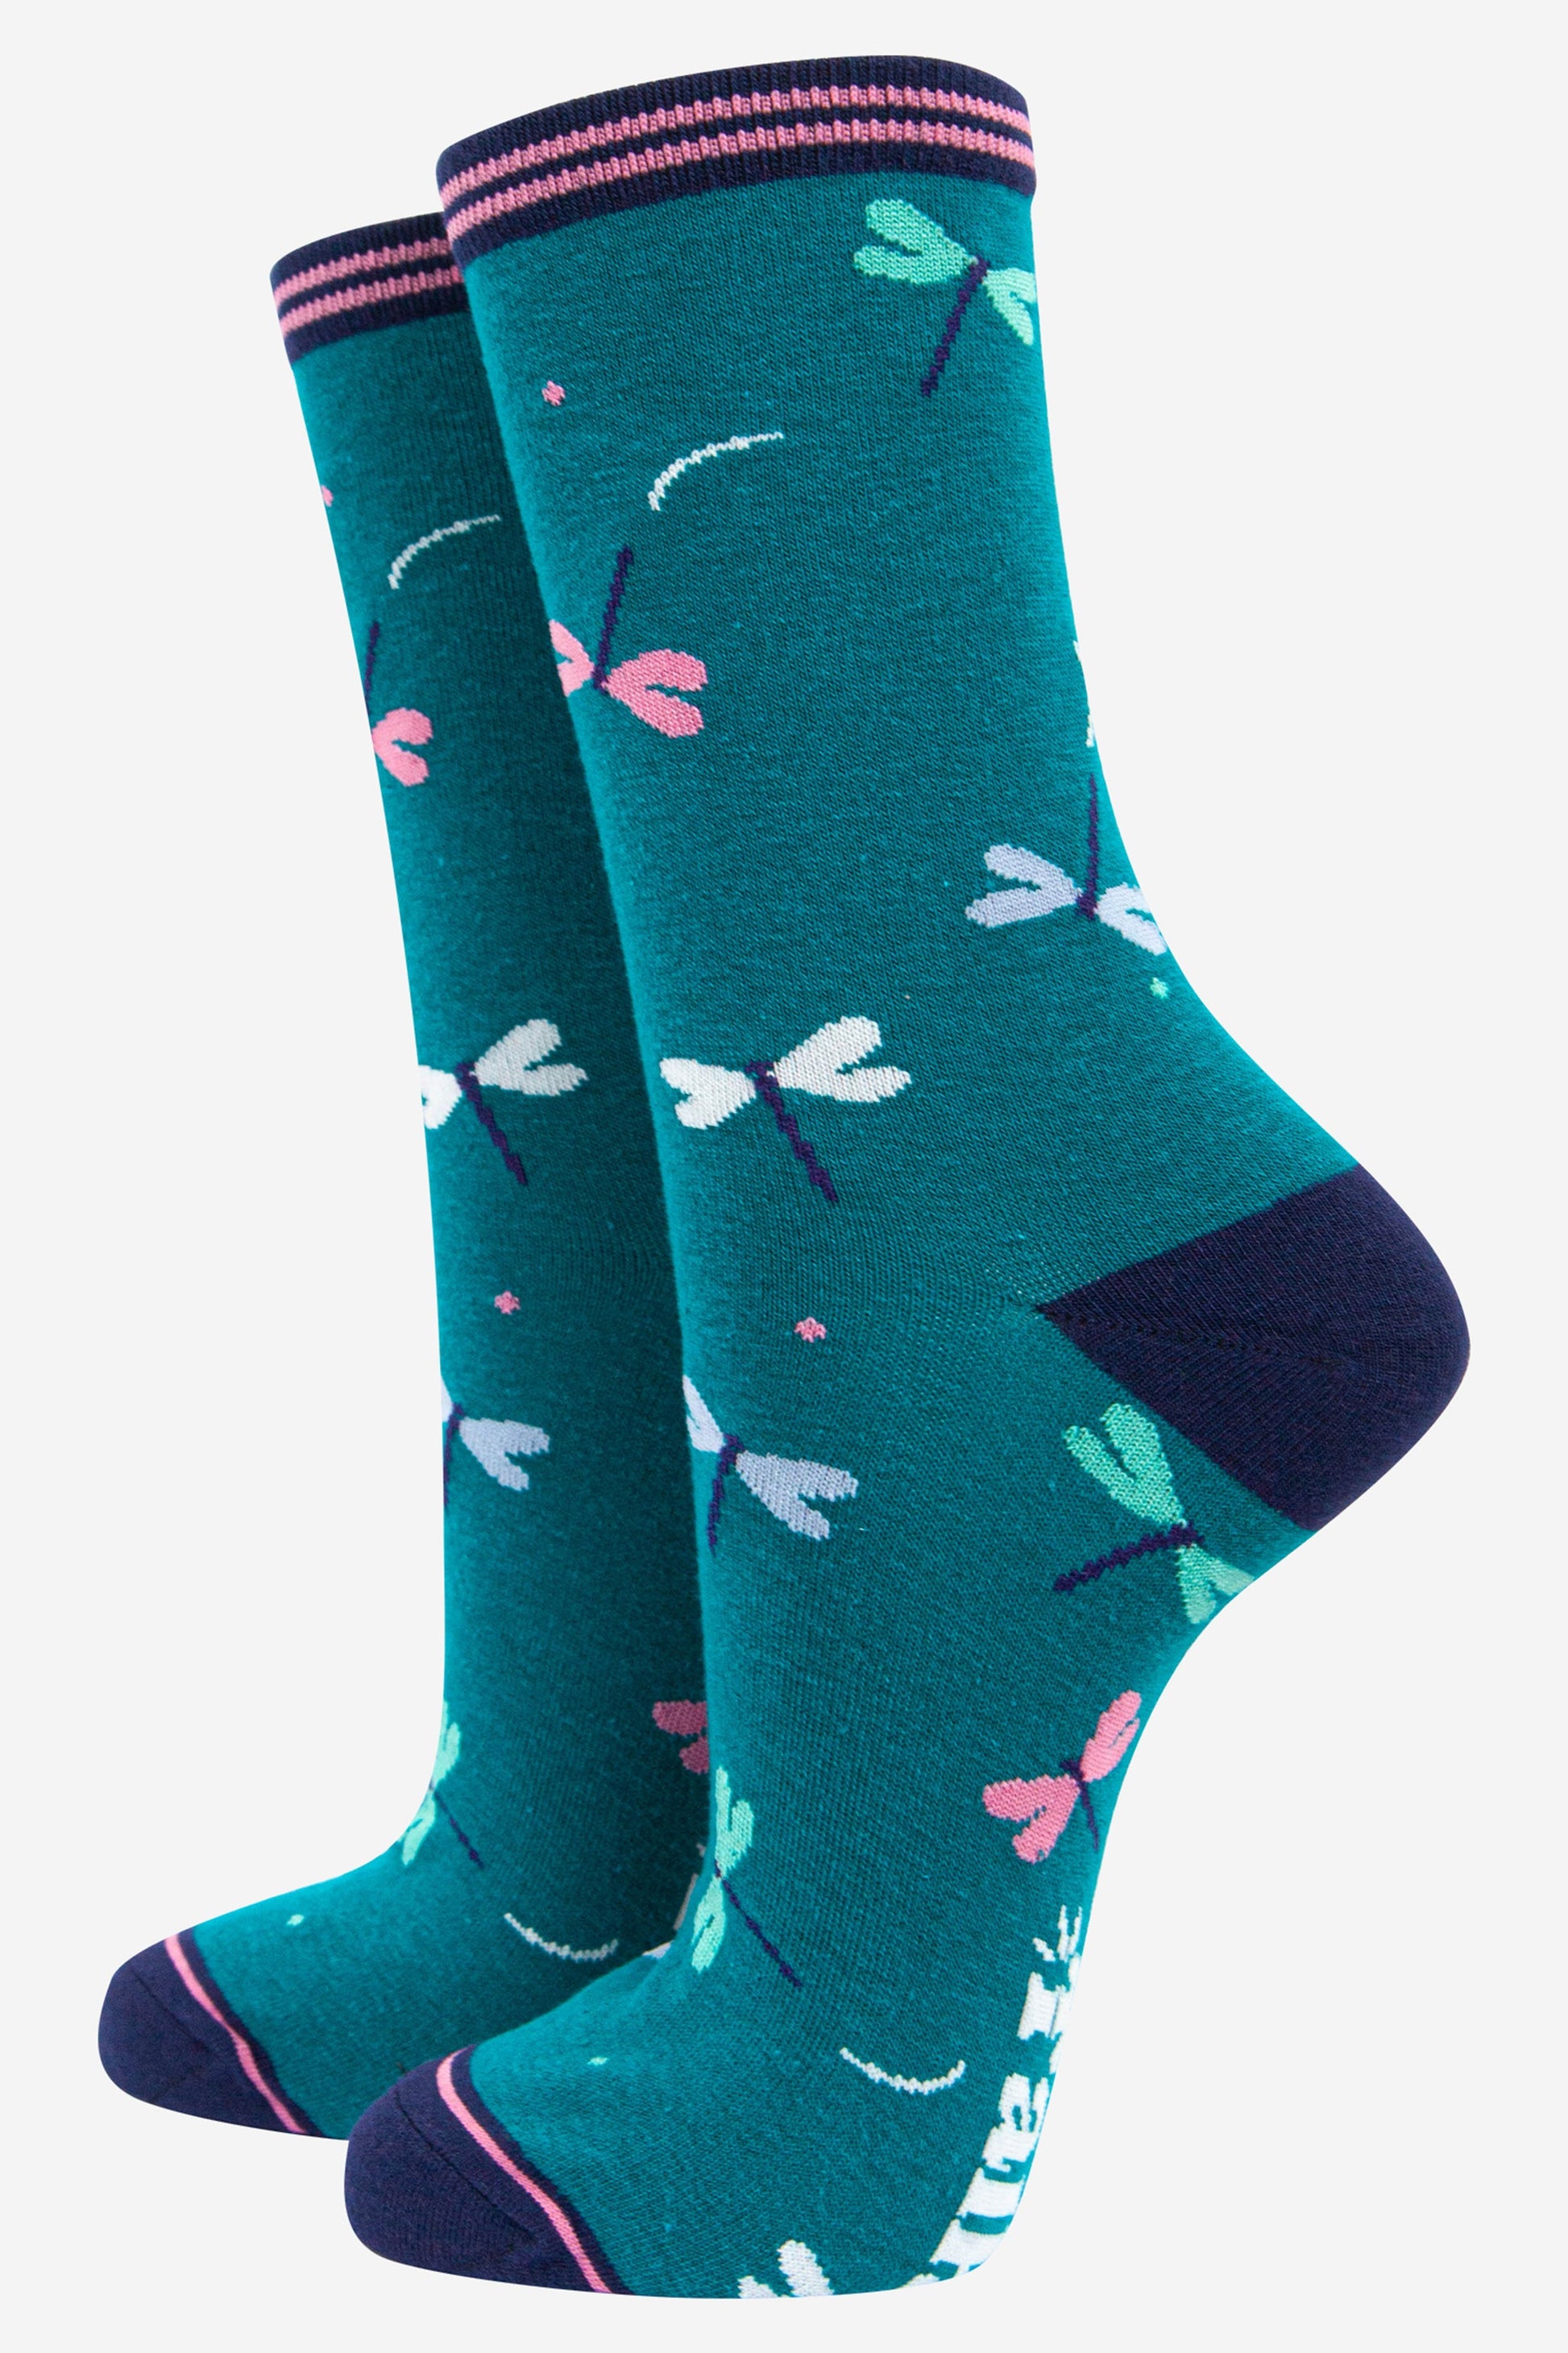 blue bamboo socks with a pattern of white, blue and pink dragonflies 